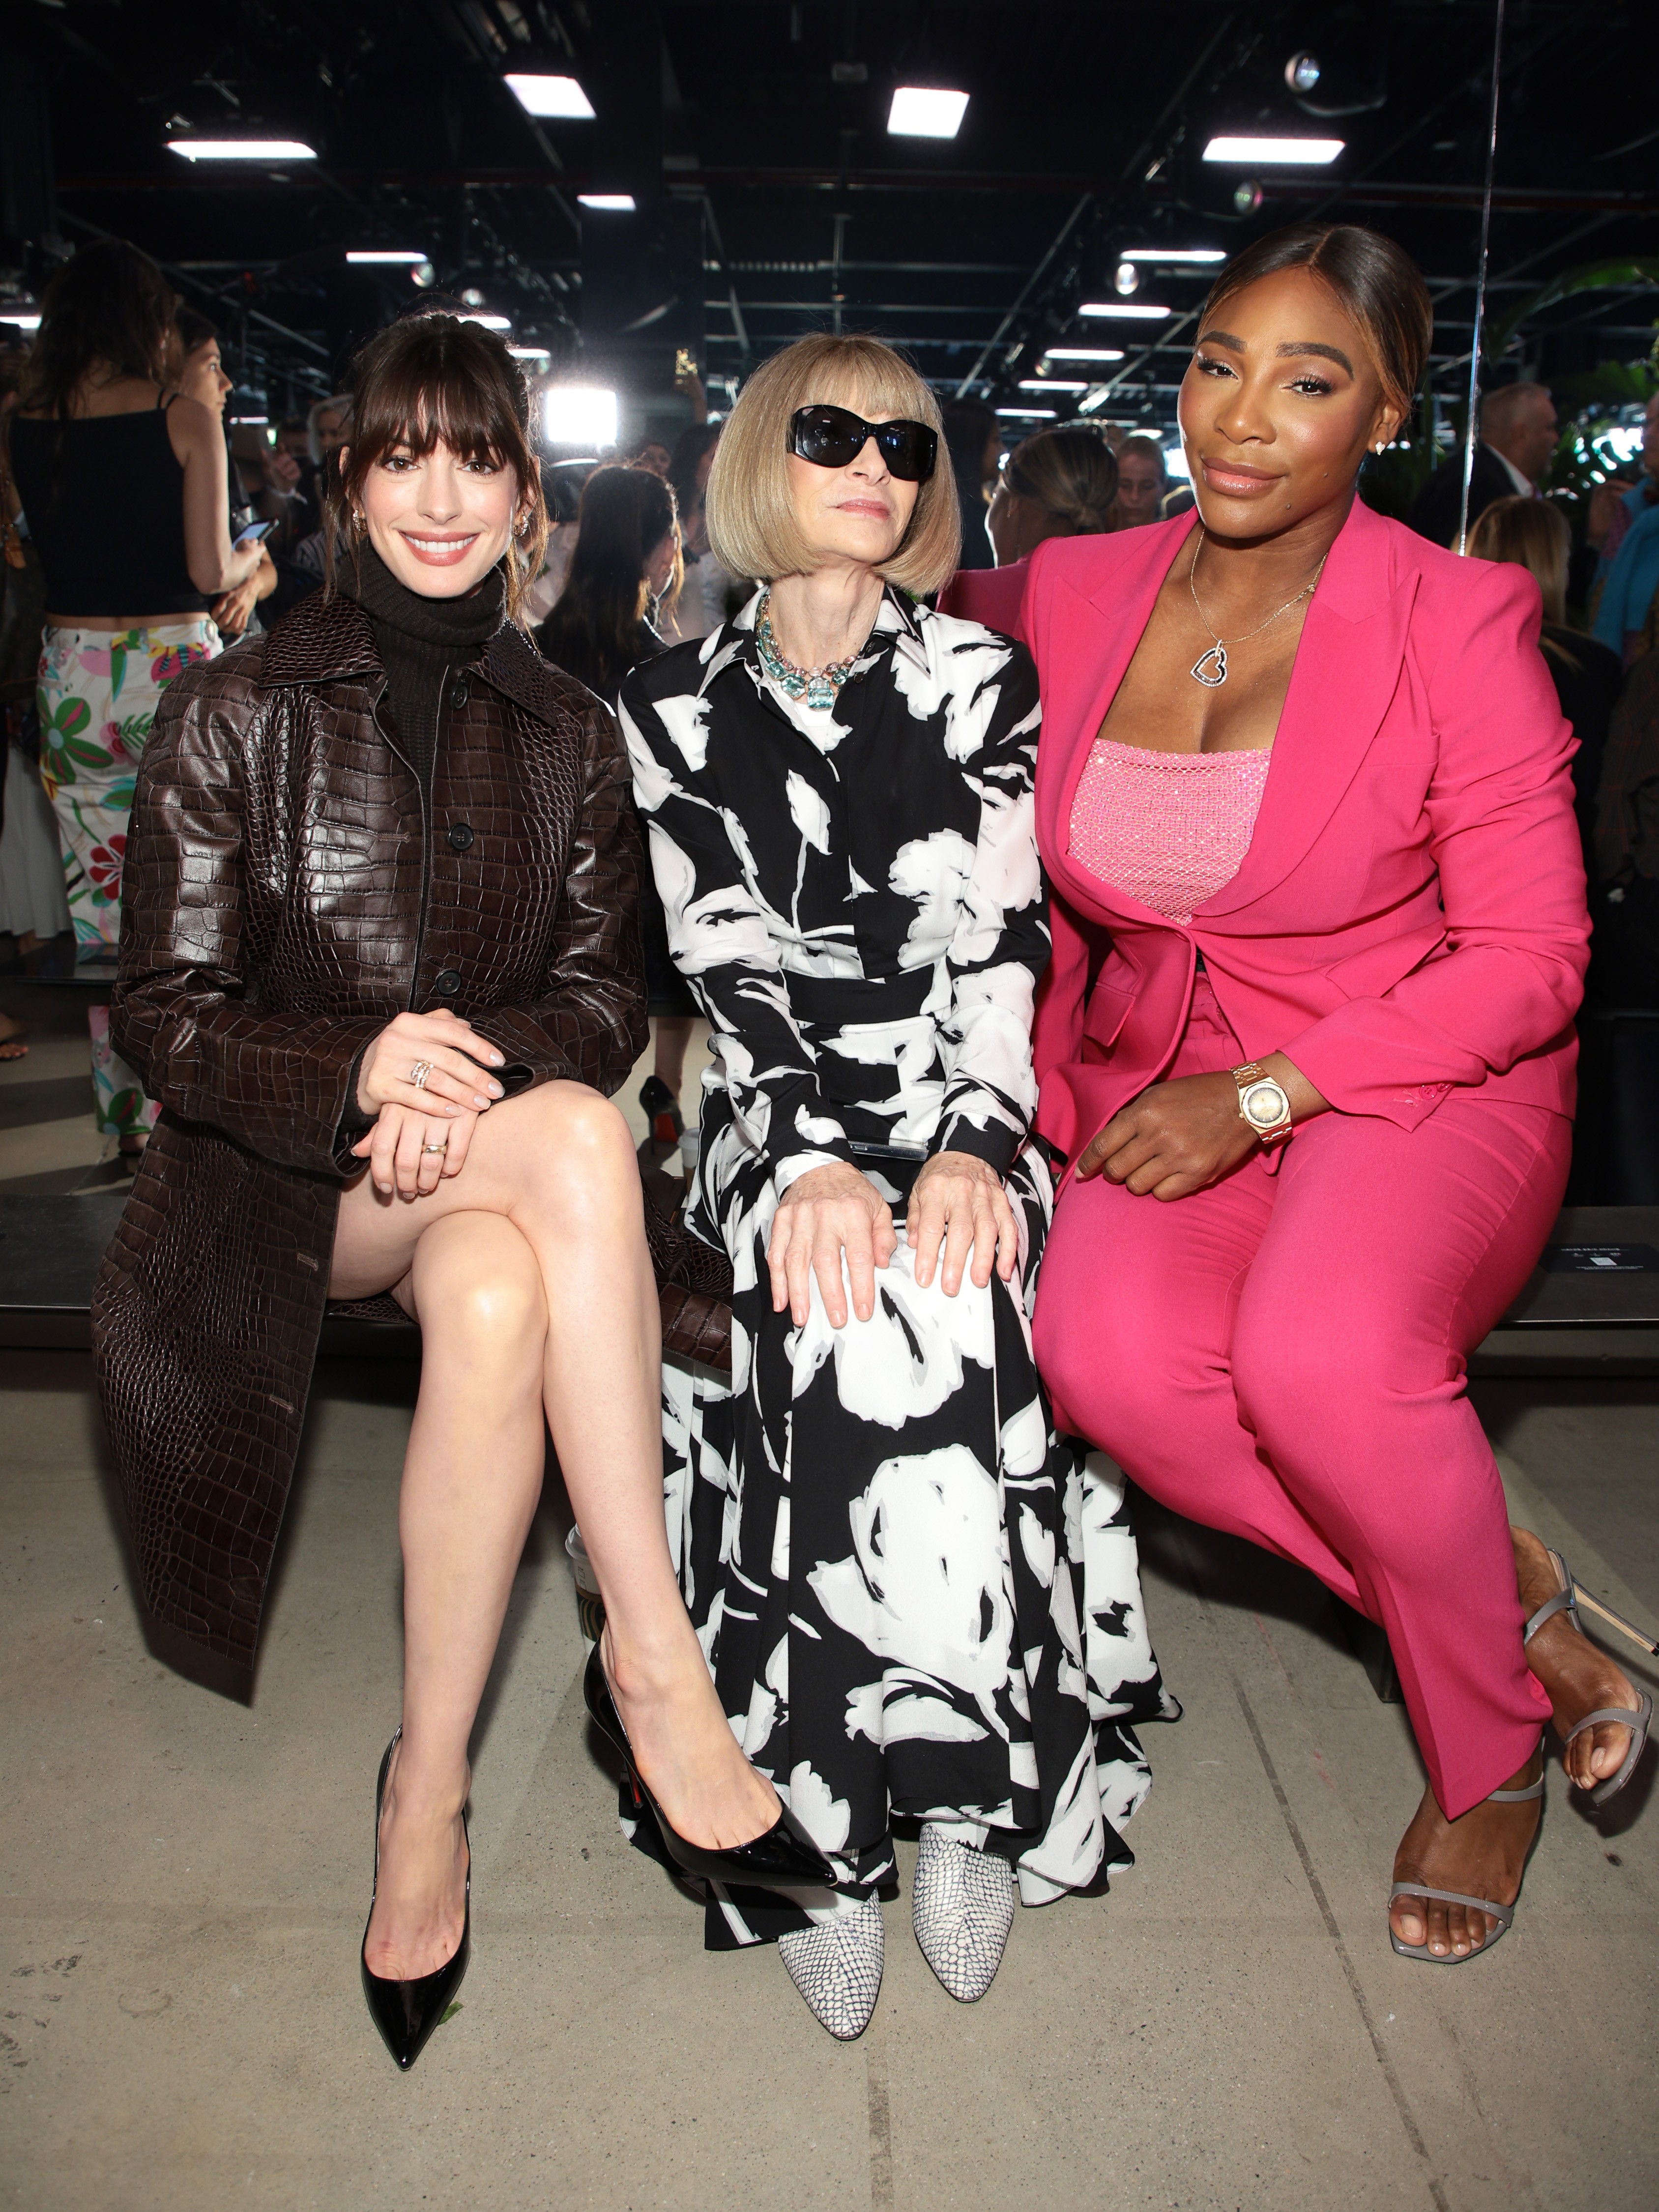 NEW YORK, NEW YORK - SEPTEMBER 14: (L-R) Anne Hathaway, Anna Wintour, and Serena Williams attend the Michael Kors Collection Spring/Summer 2023 Runway Show on September 14, 2022 in New York City. (Photo by Dimitrios Kambouris/Getty Images for Michael Kors (Foto: Getty Images for Michael Kors)